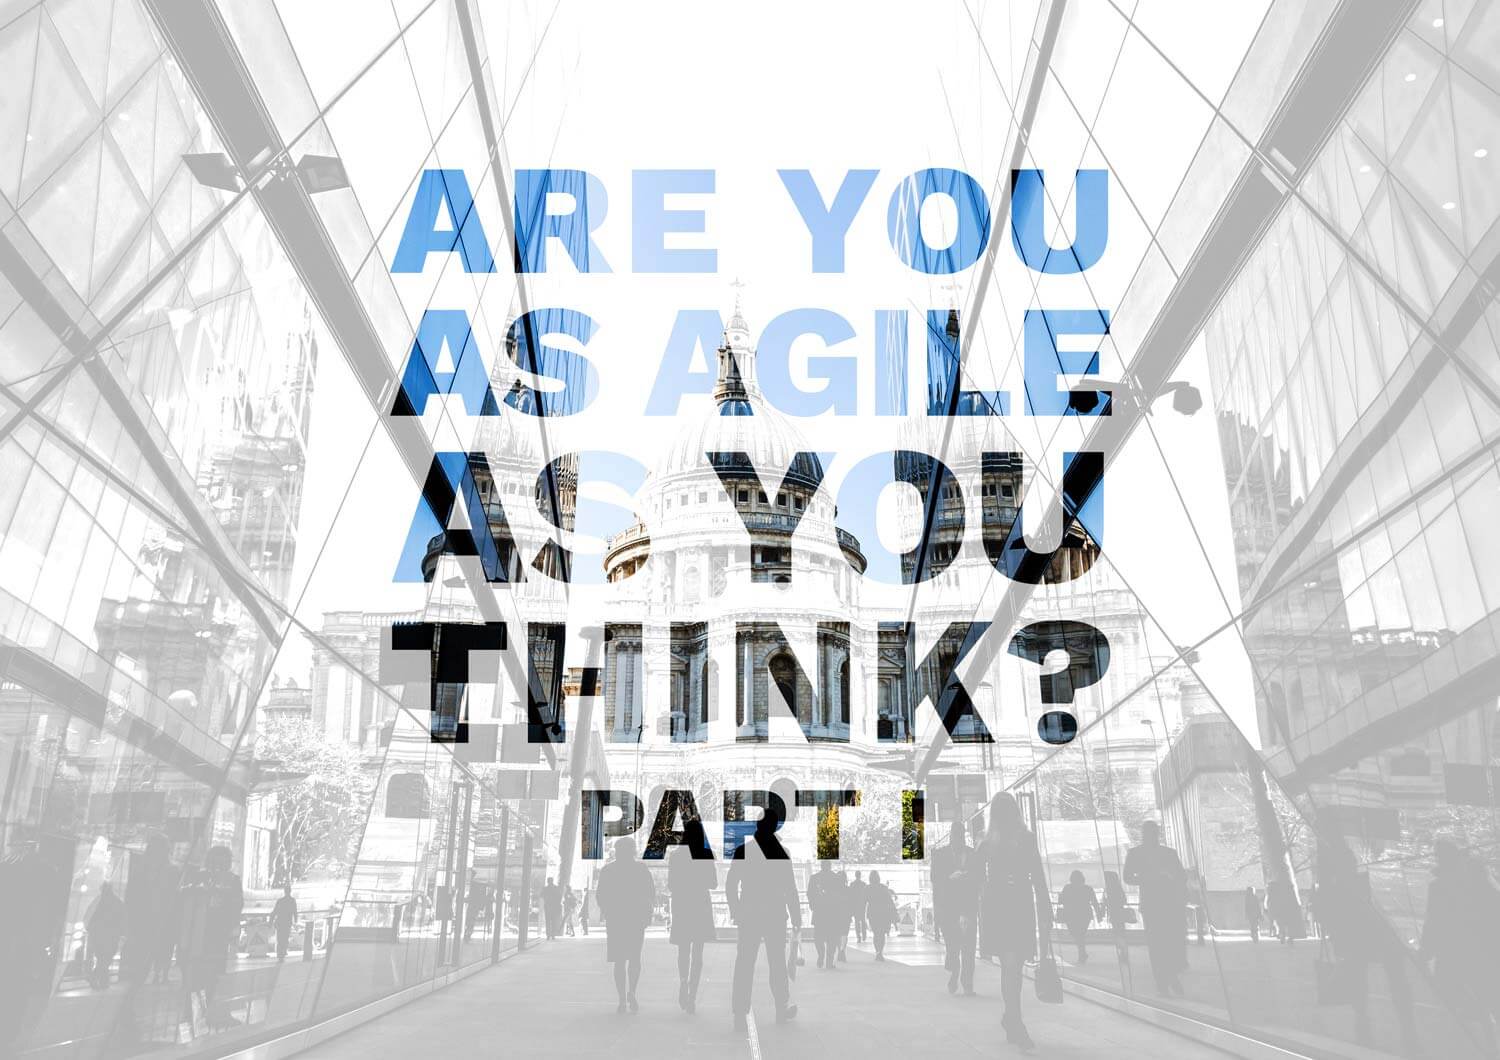 Are you as agile as you think?